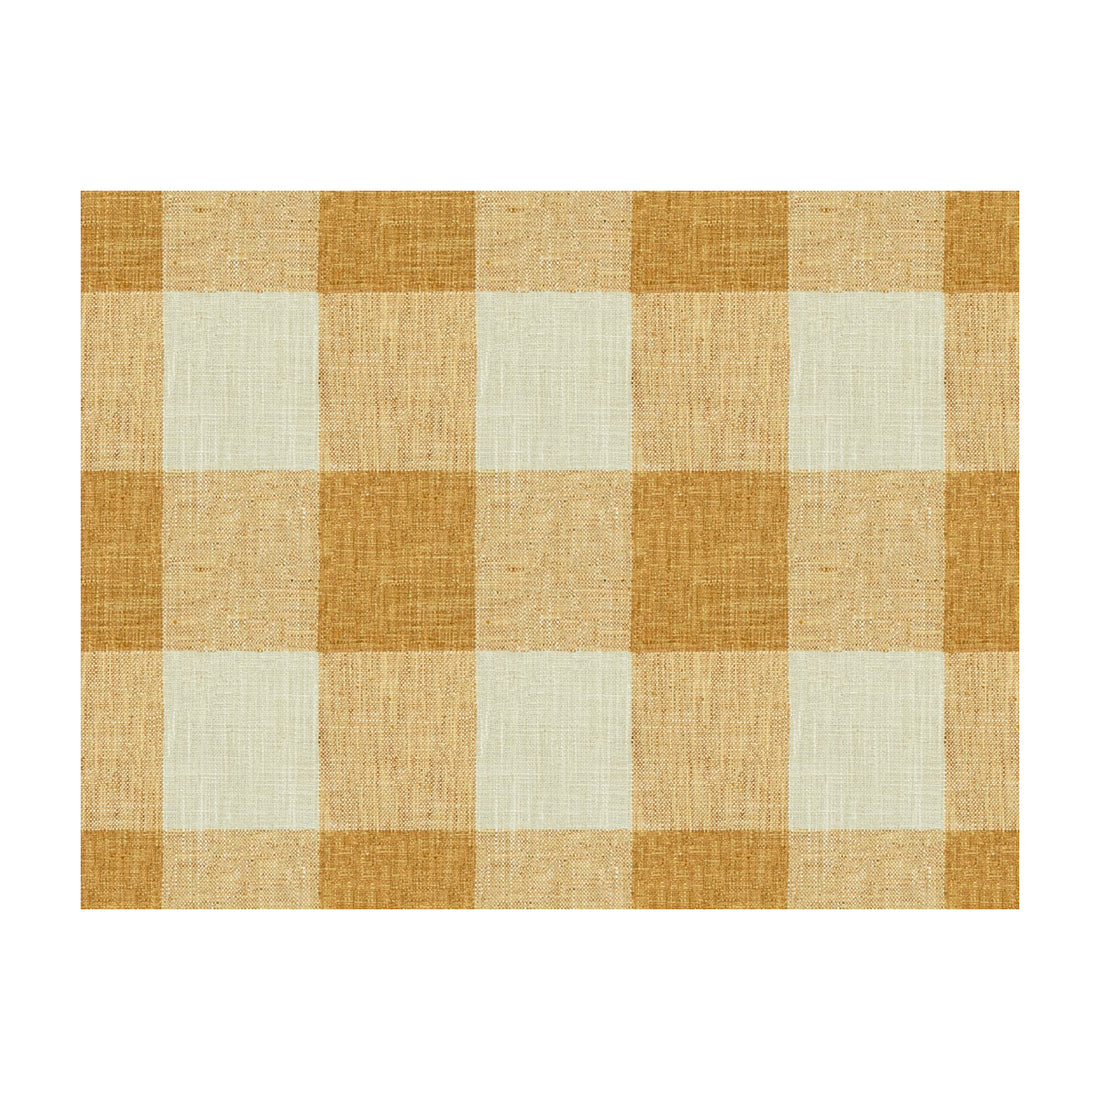 Kravet Basics fabric in 34090-416 color - pattern 34090.416.0 - by Kravet Basics in the Bungalow Chic II collection